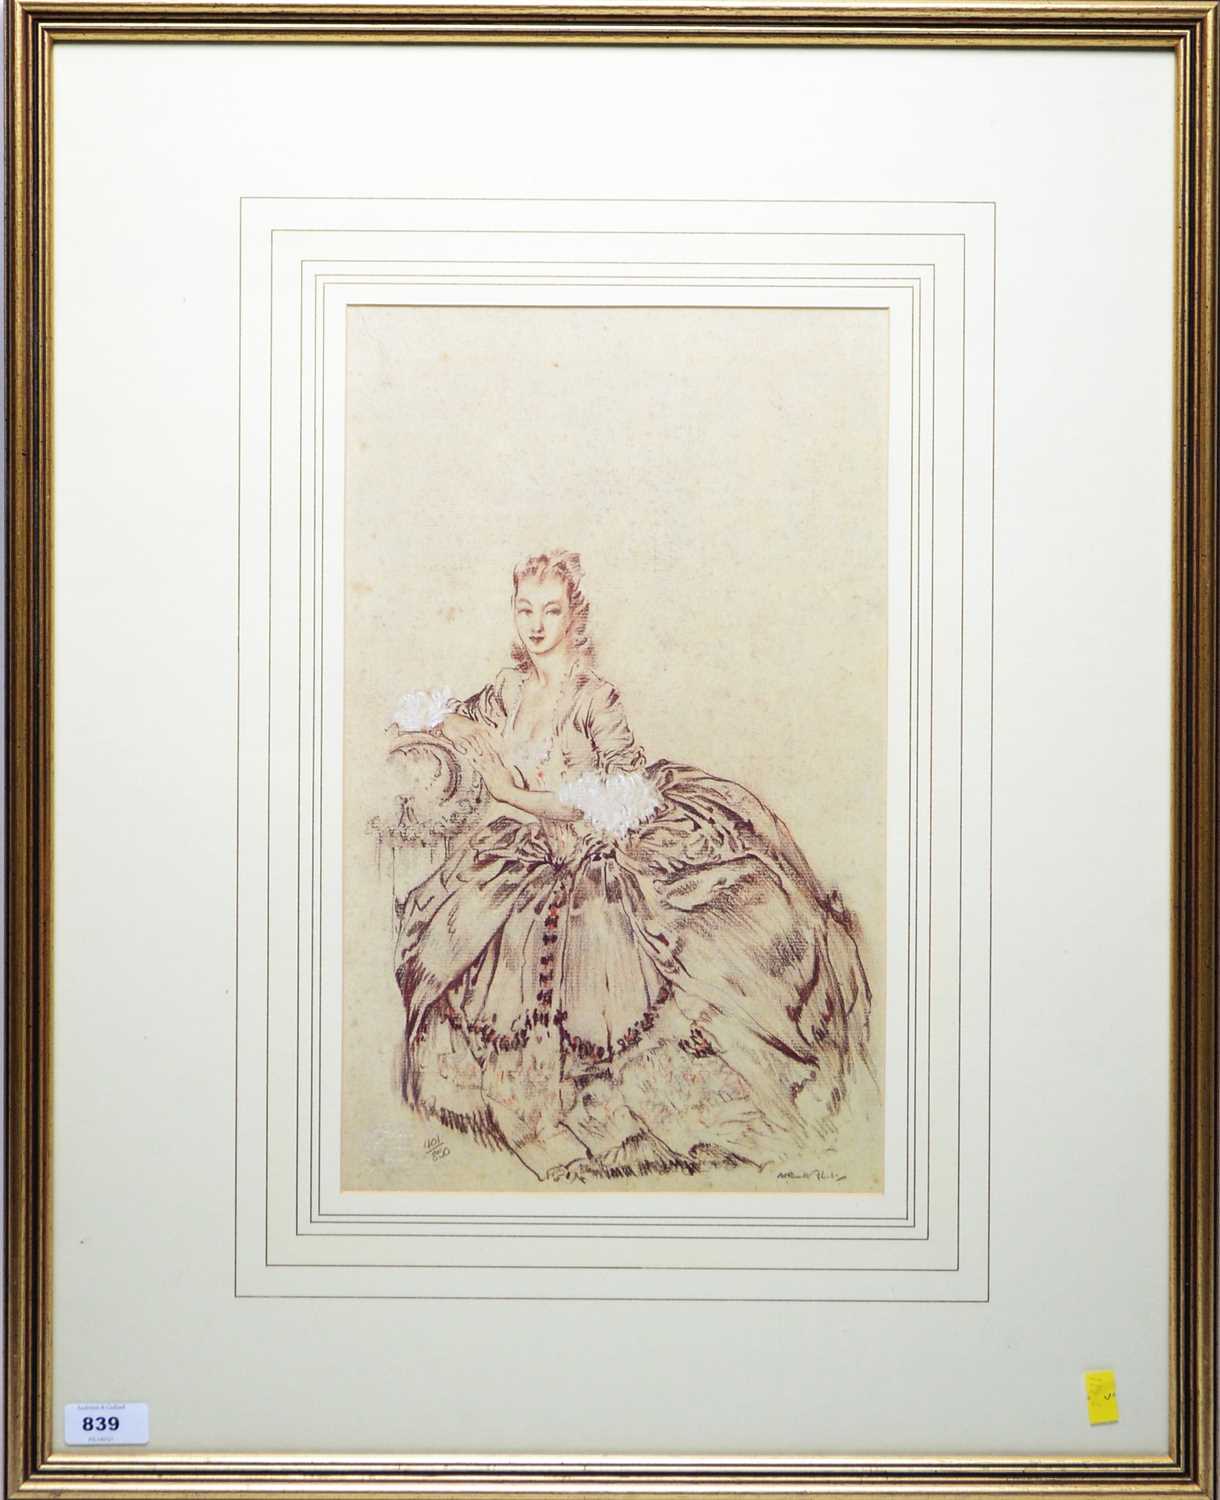 Lot 839 - Sir William Russell Flint - Limited edition print